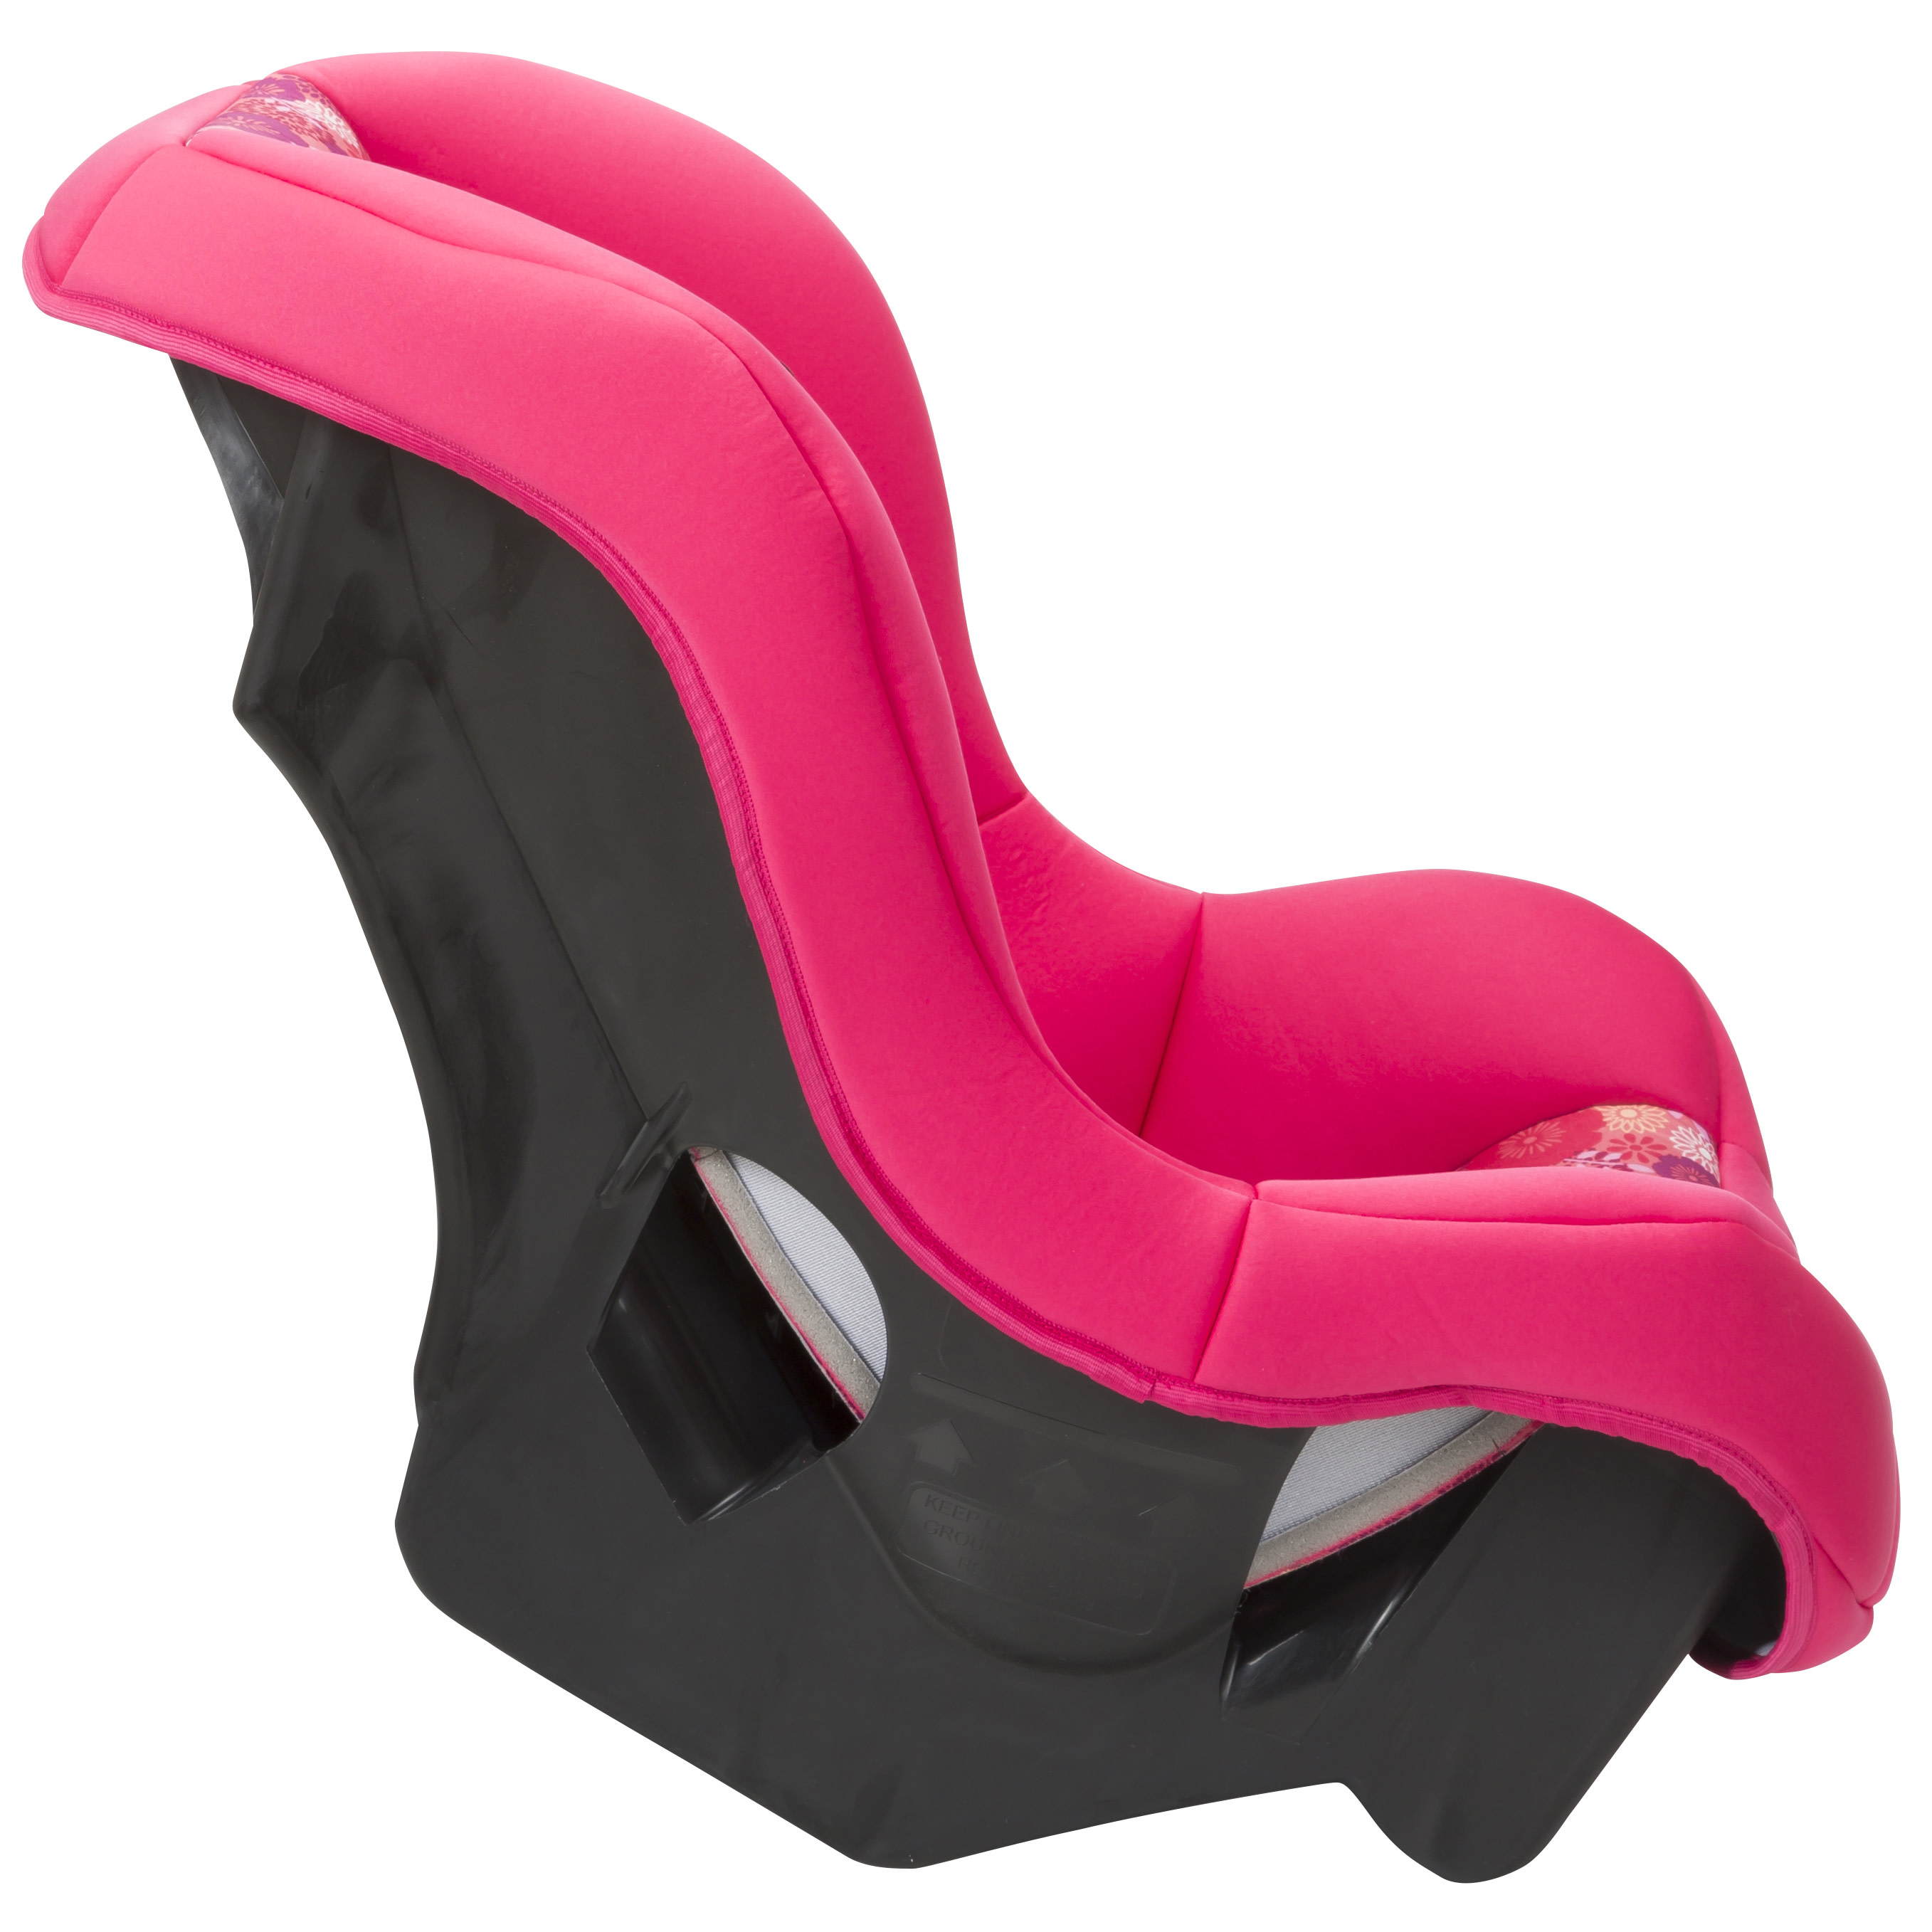 Cosco Scenera Convertible Car Seat, Floral Orchard Blossom Pink - image 7 of 13